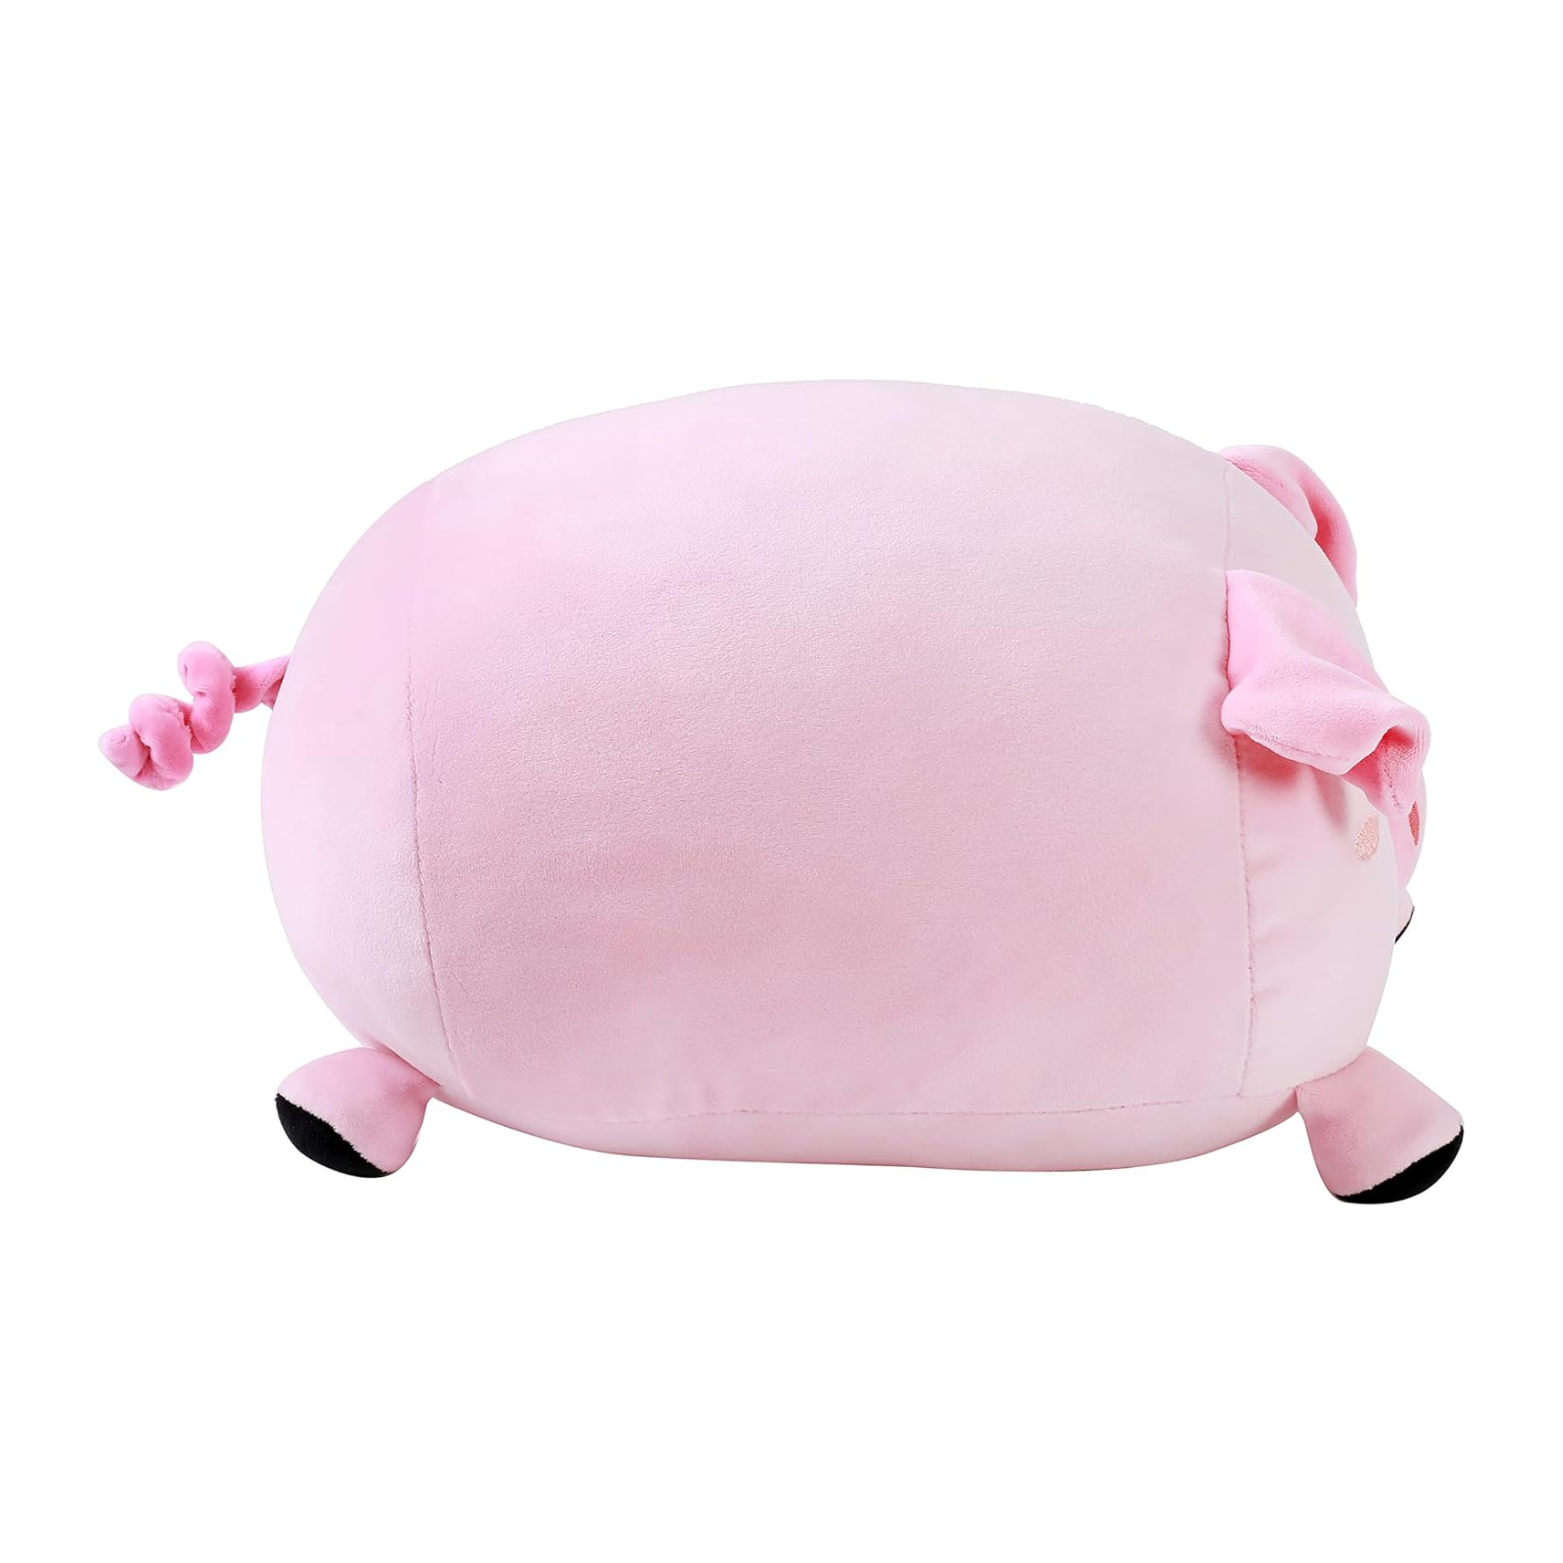 Squishmallow - Pig Pillow